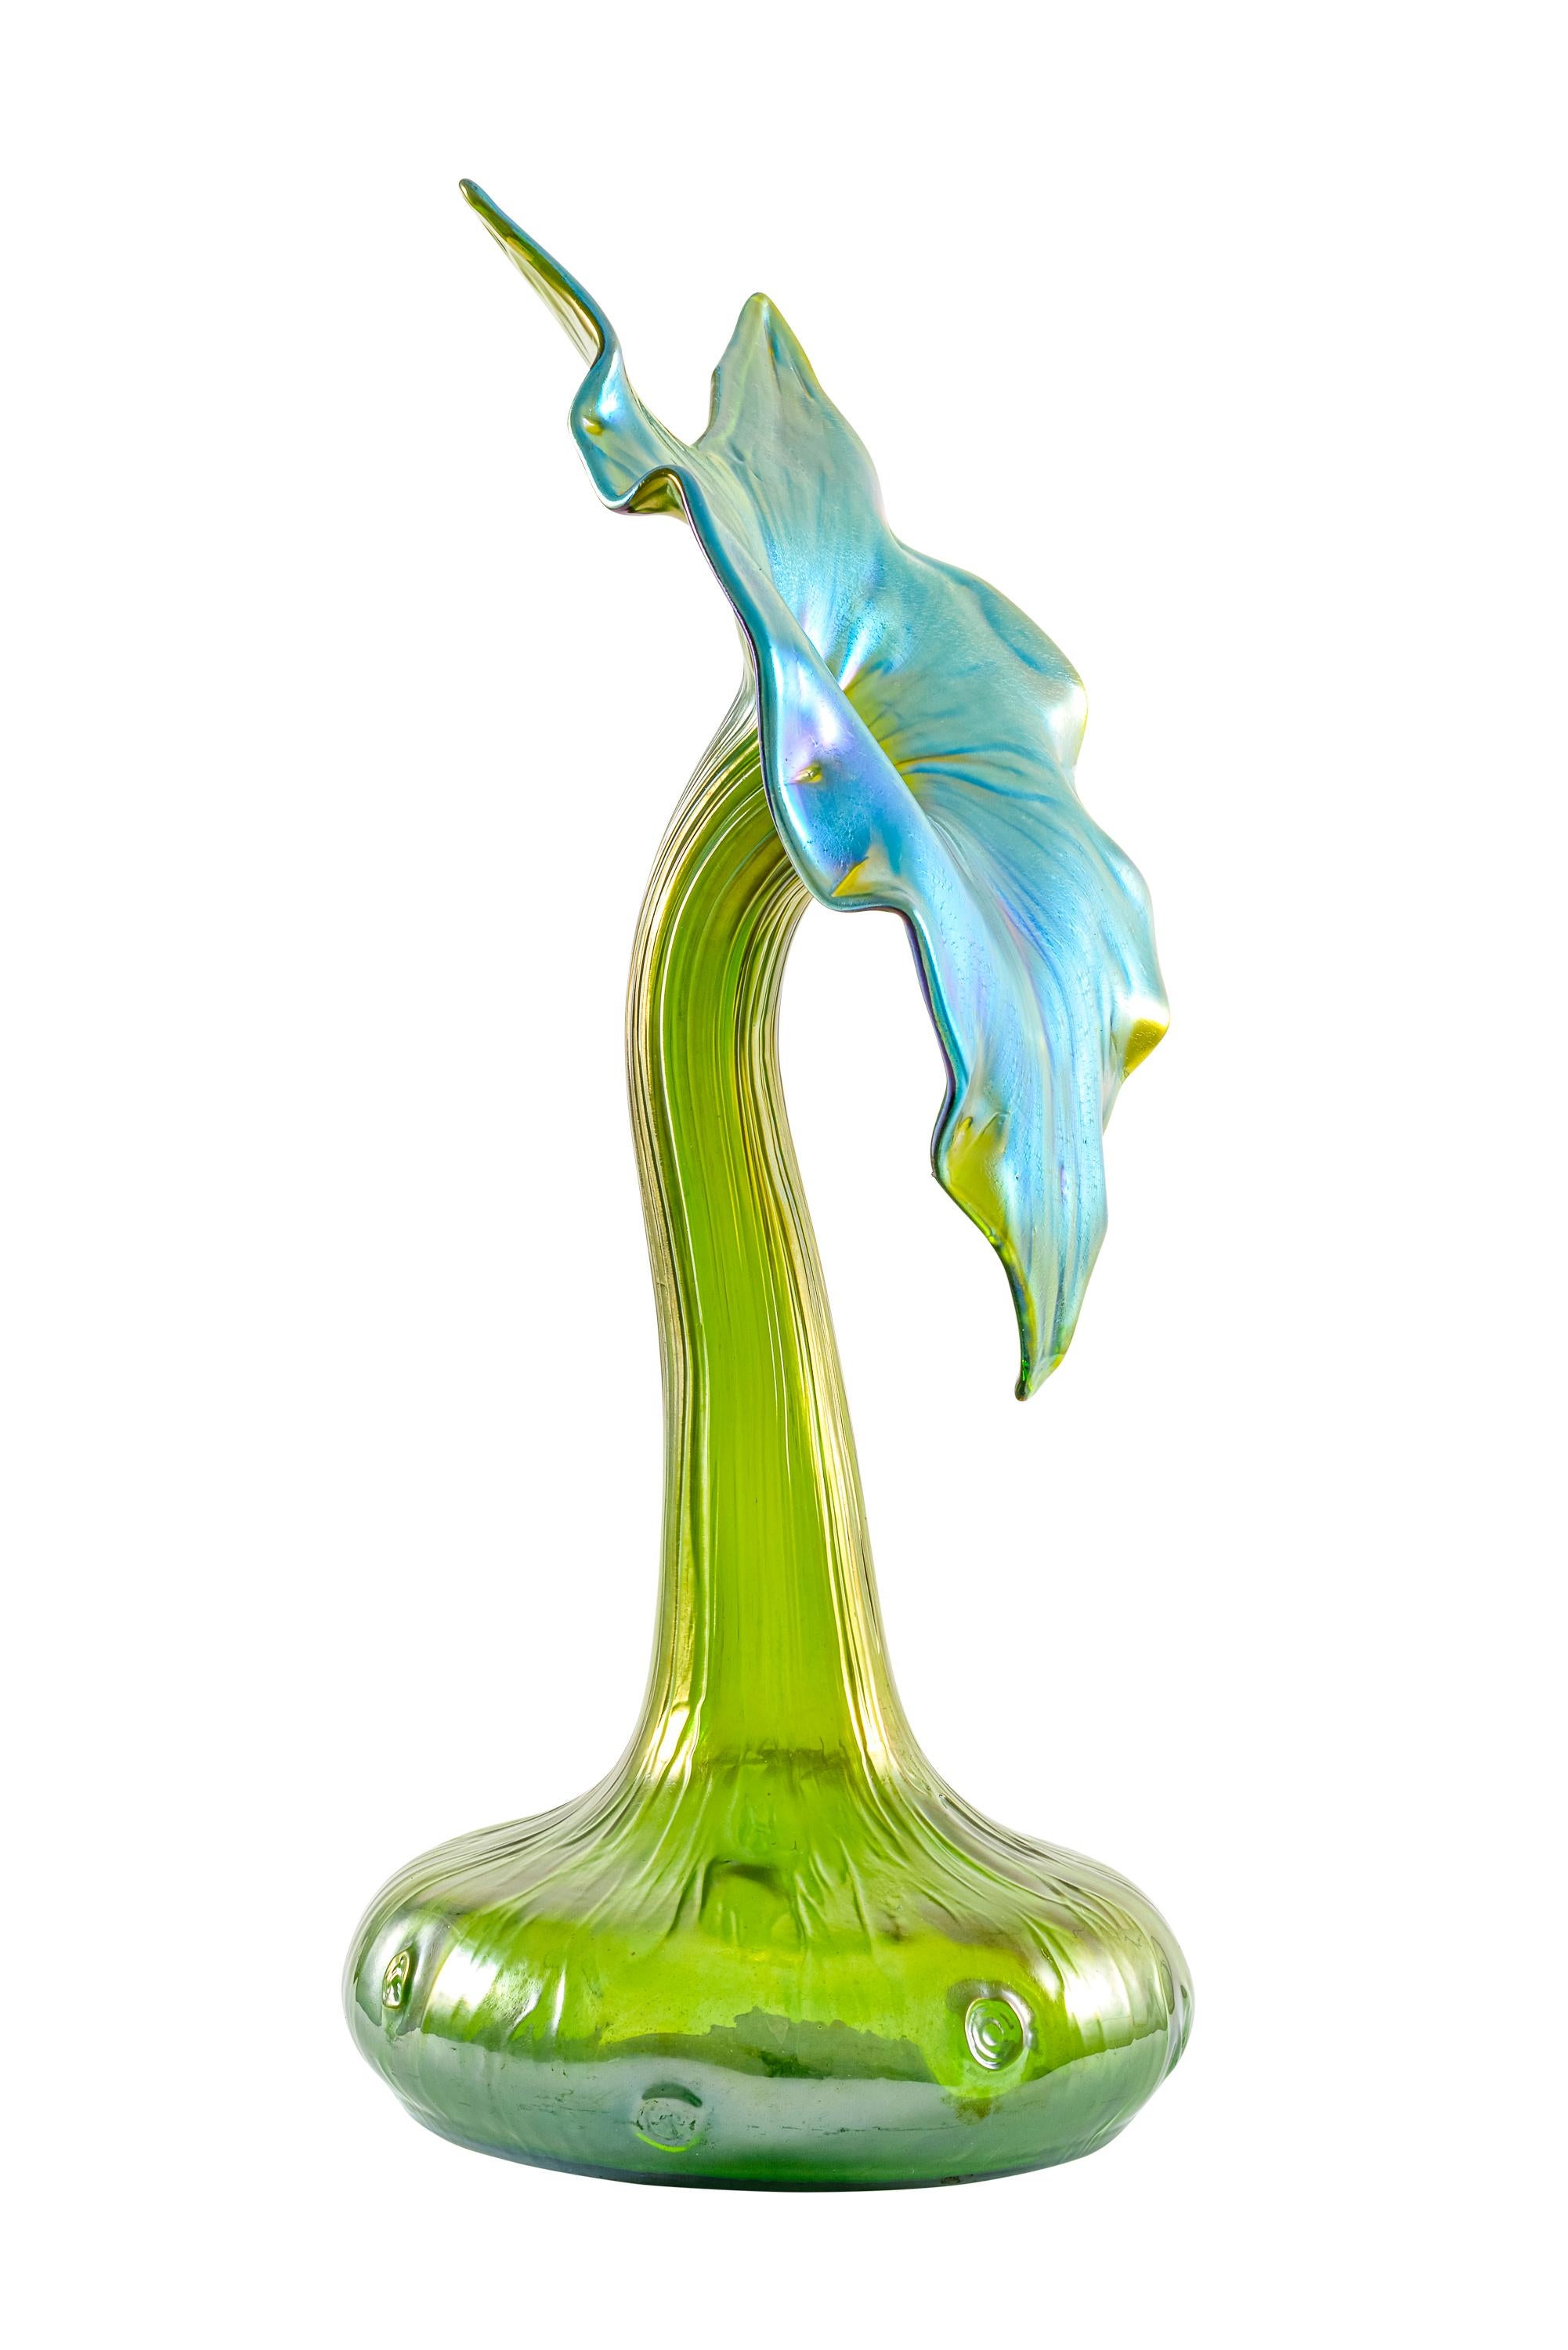 Jack-in-the-pulpit flower vase Johann Loetz-Witwe glass circa 1899 Austrian Jugendstil green

Organic shapes were highly appreciated by the buying audience and the designers of the Loetz manufacture invented a high number of floral objects.